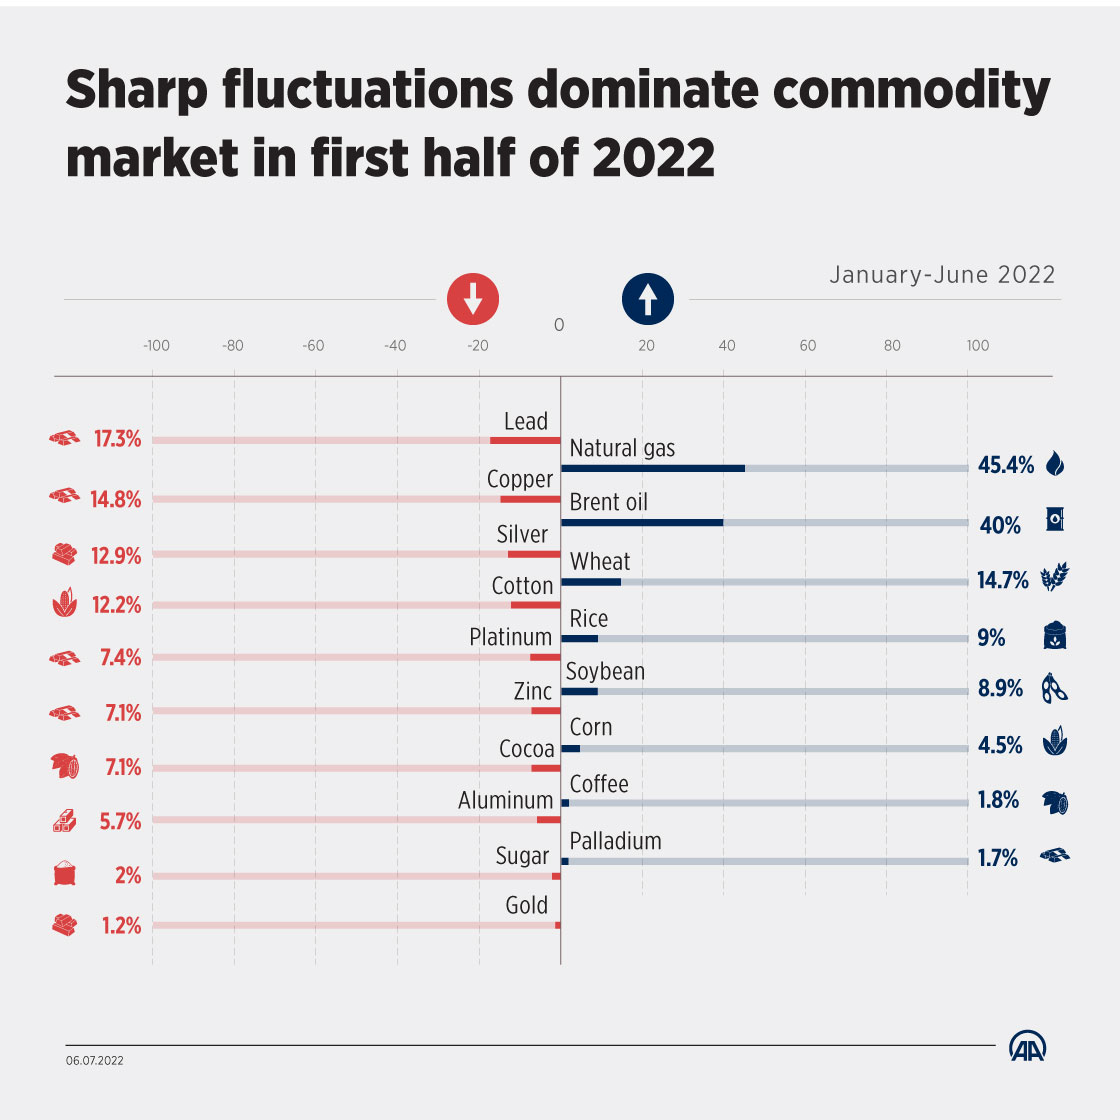 Sharp fluctuations dominate commodity market in first half of 2022